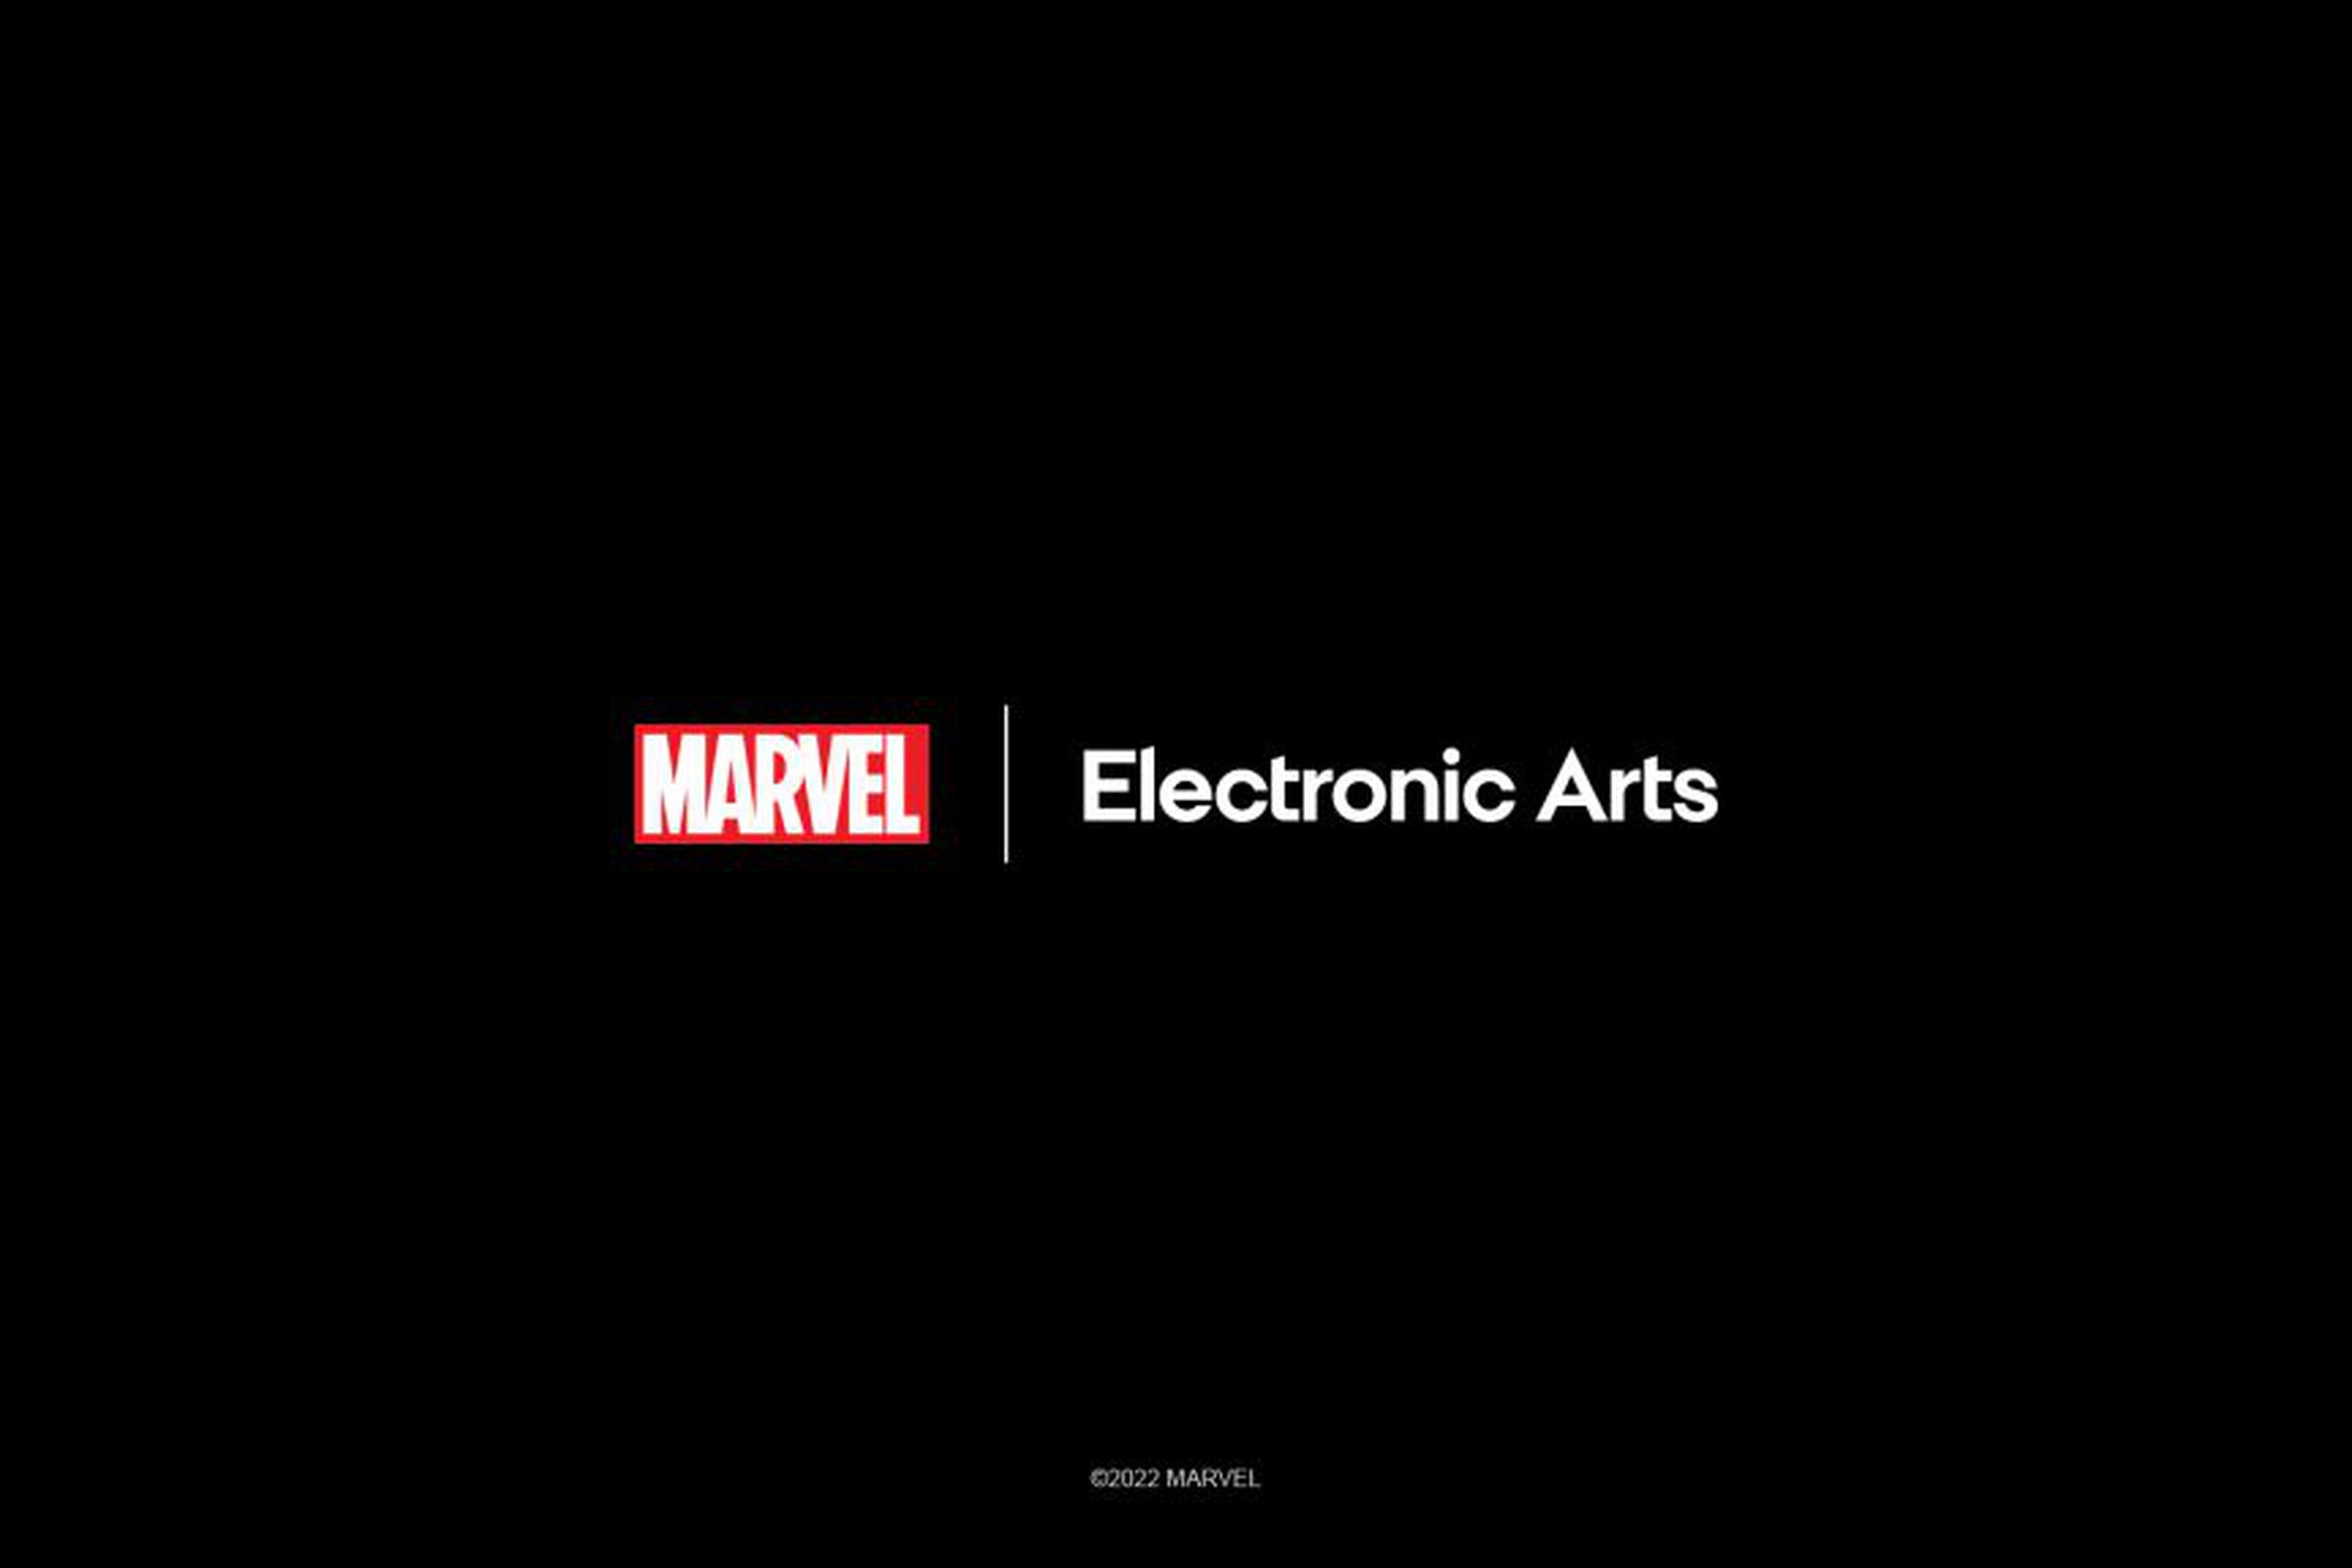 The marvel and Electronic Arts logos on a black background.